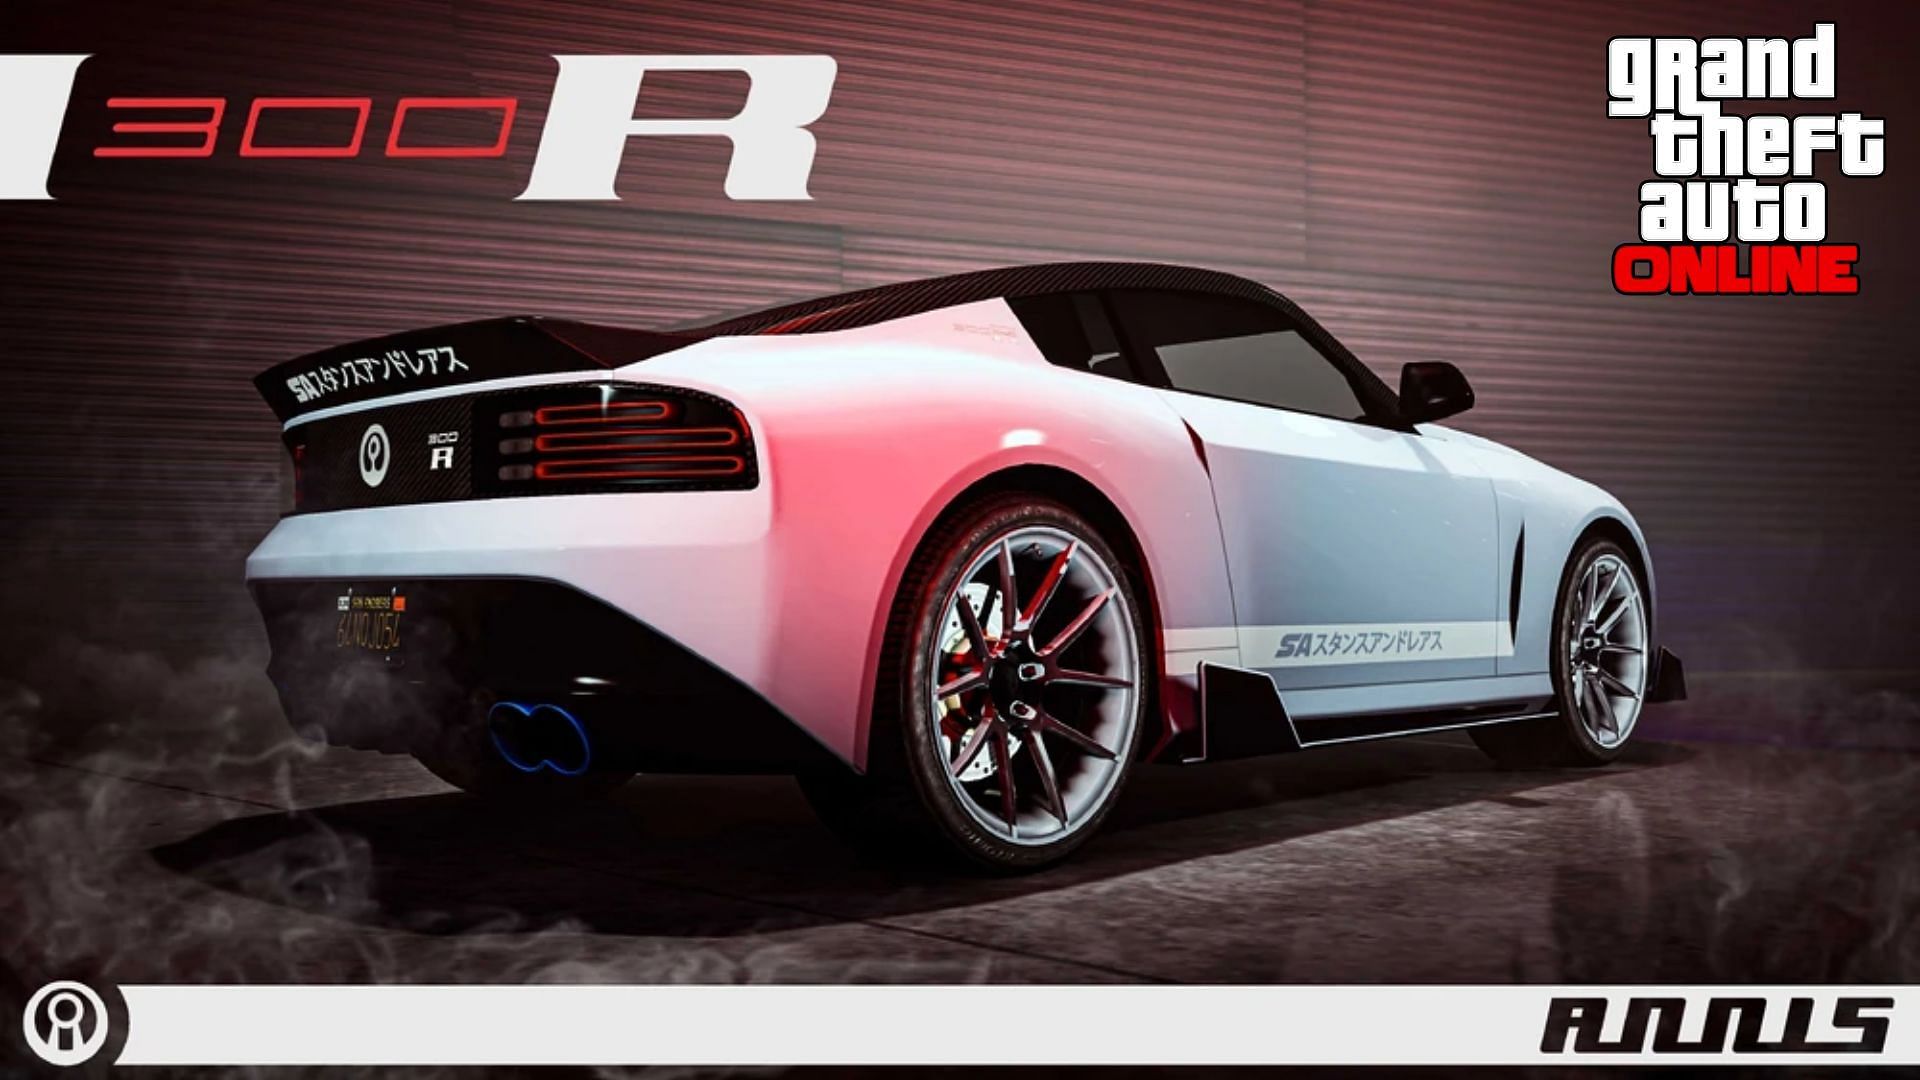 A promotional image for the Annis 300R in GTA Online (Image via Rockstar Games)